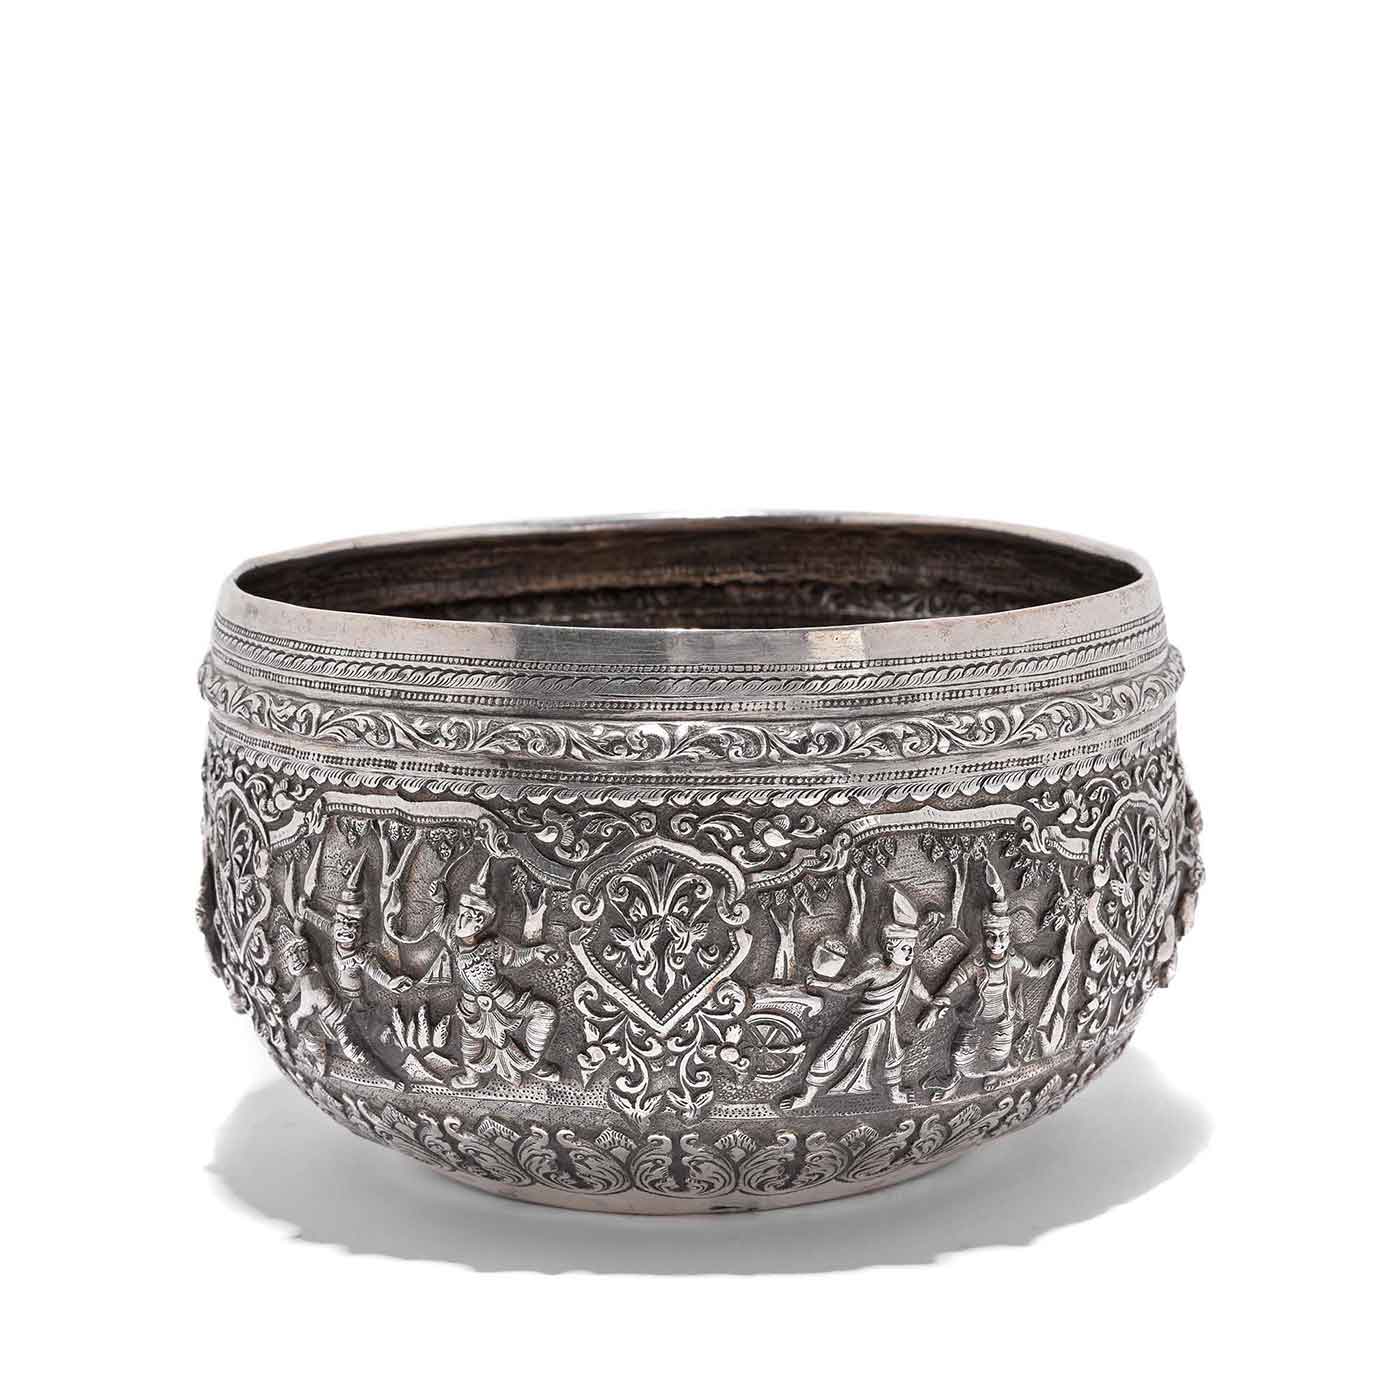 Repousse Silver Bowl from Burma - 19thC | Indigo Antiques